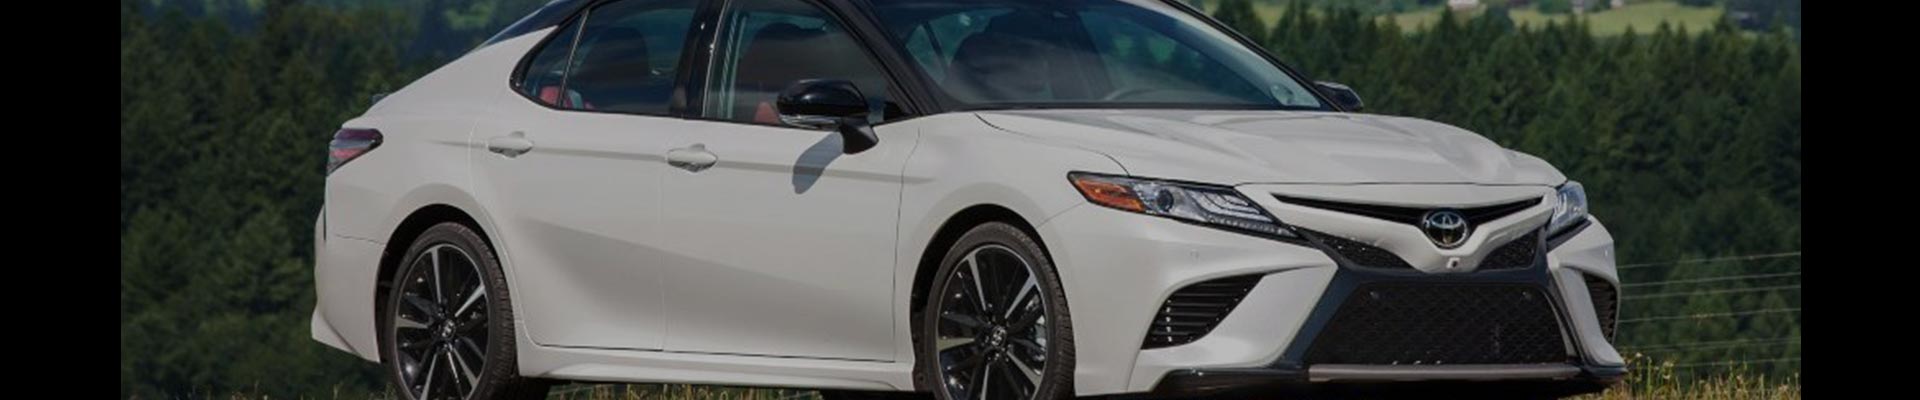 Shop Replacement and OEM 2019 Toyota Camry Parts with Discounted Price on the Net